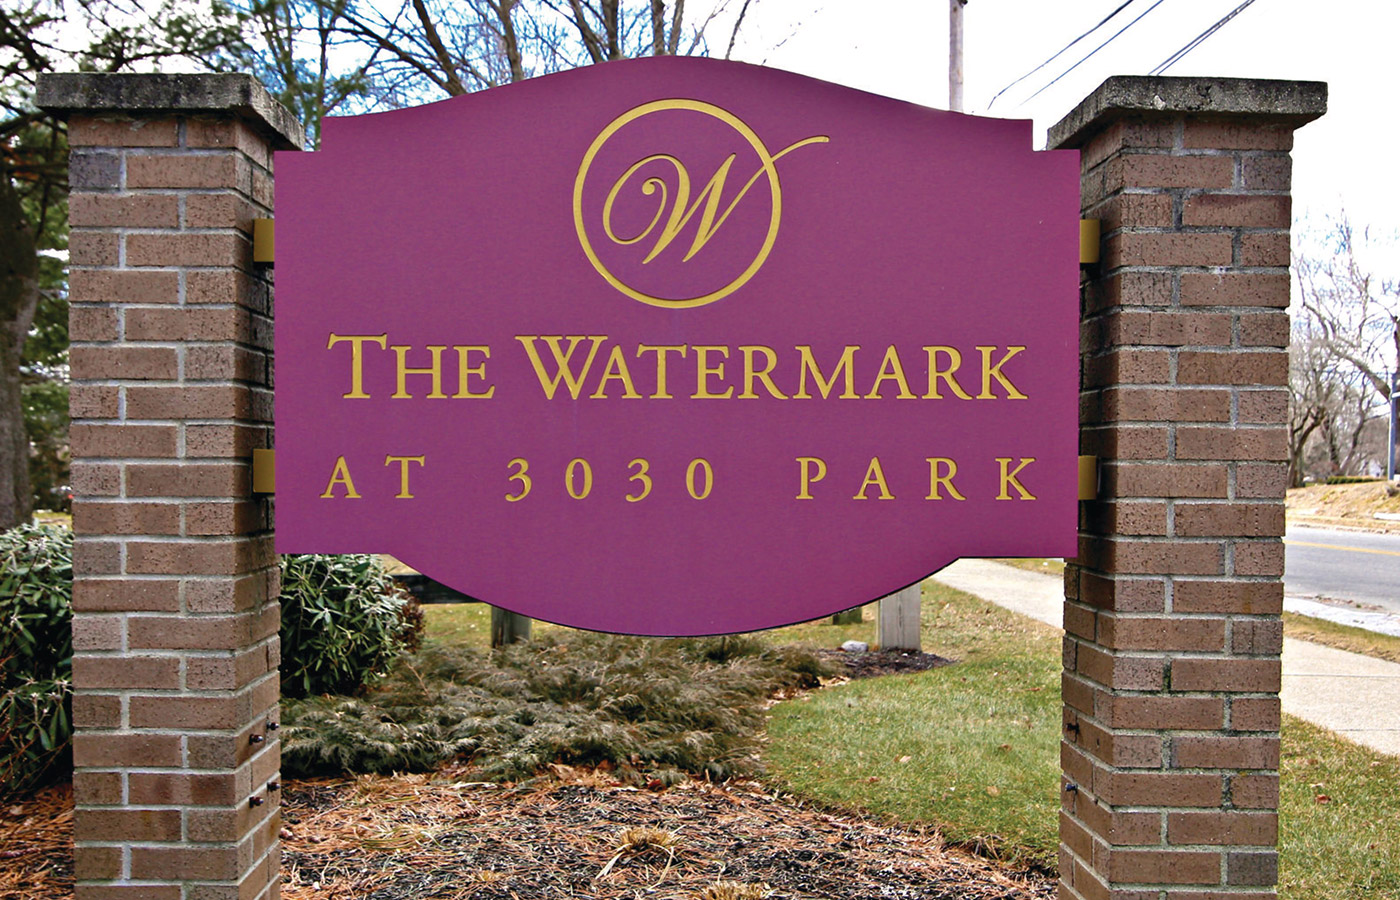 The Watermark at 3030 Park sign.